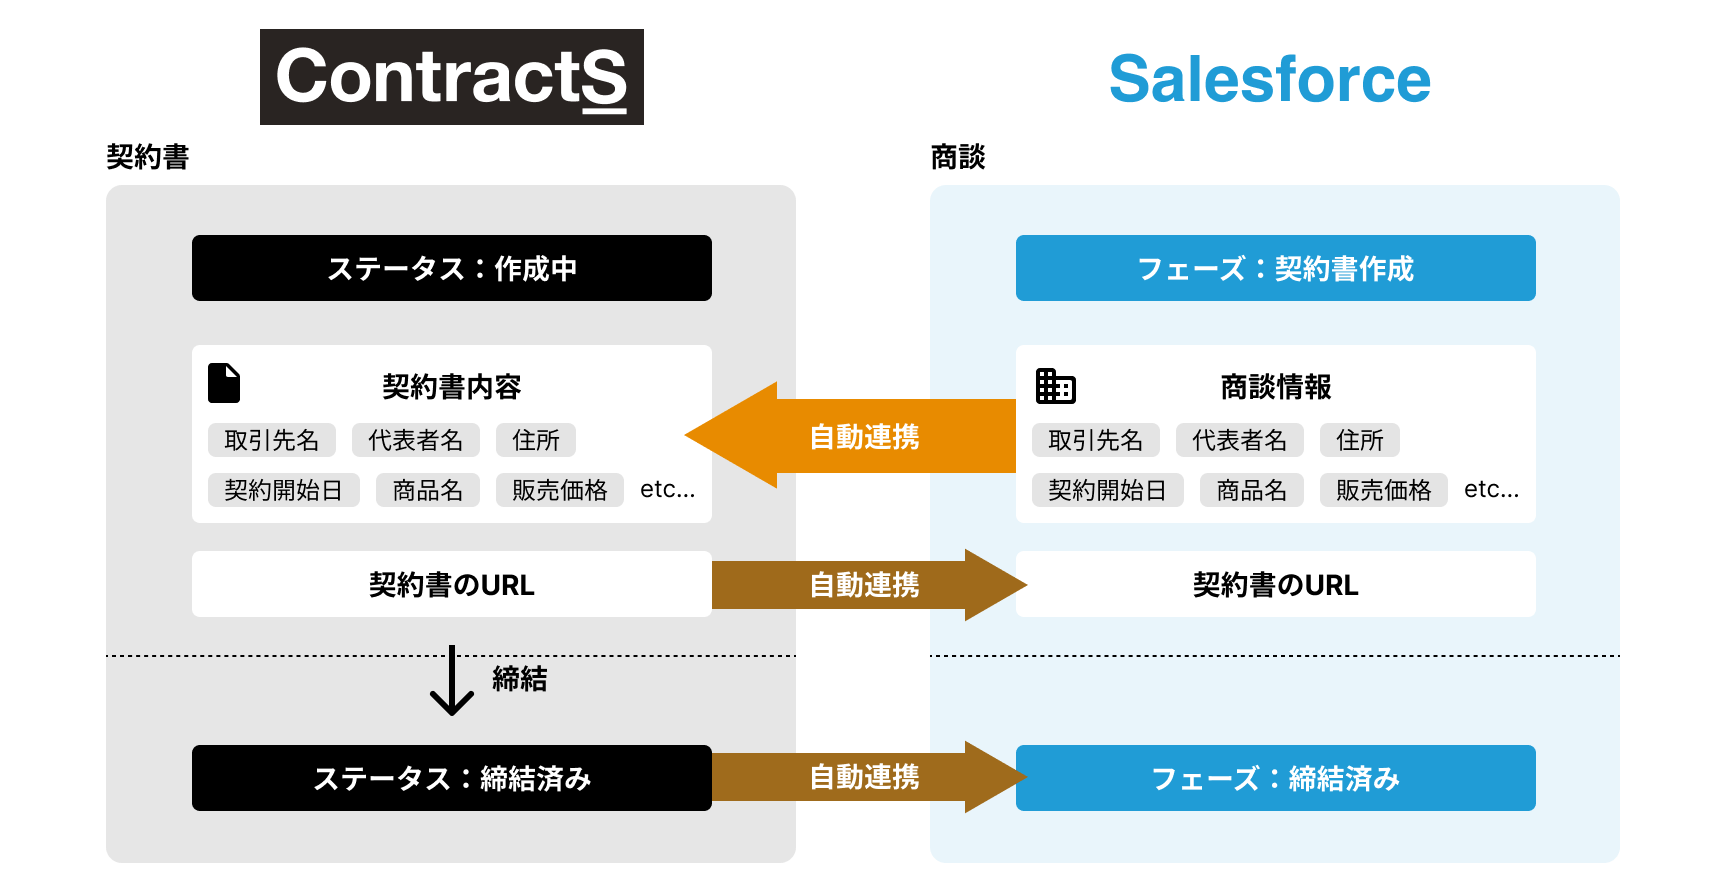 「ContractS CLM」とSalesforceを連携する 「ContractS CLM to Salesforce」の提供を開始